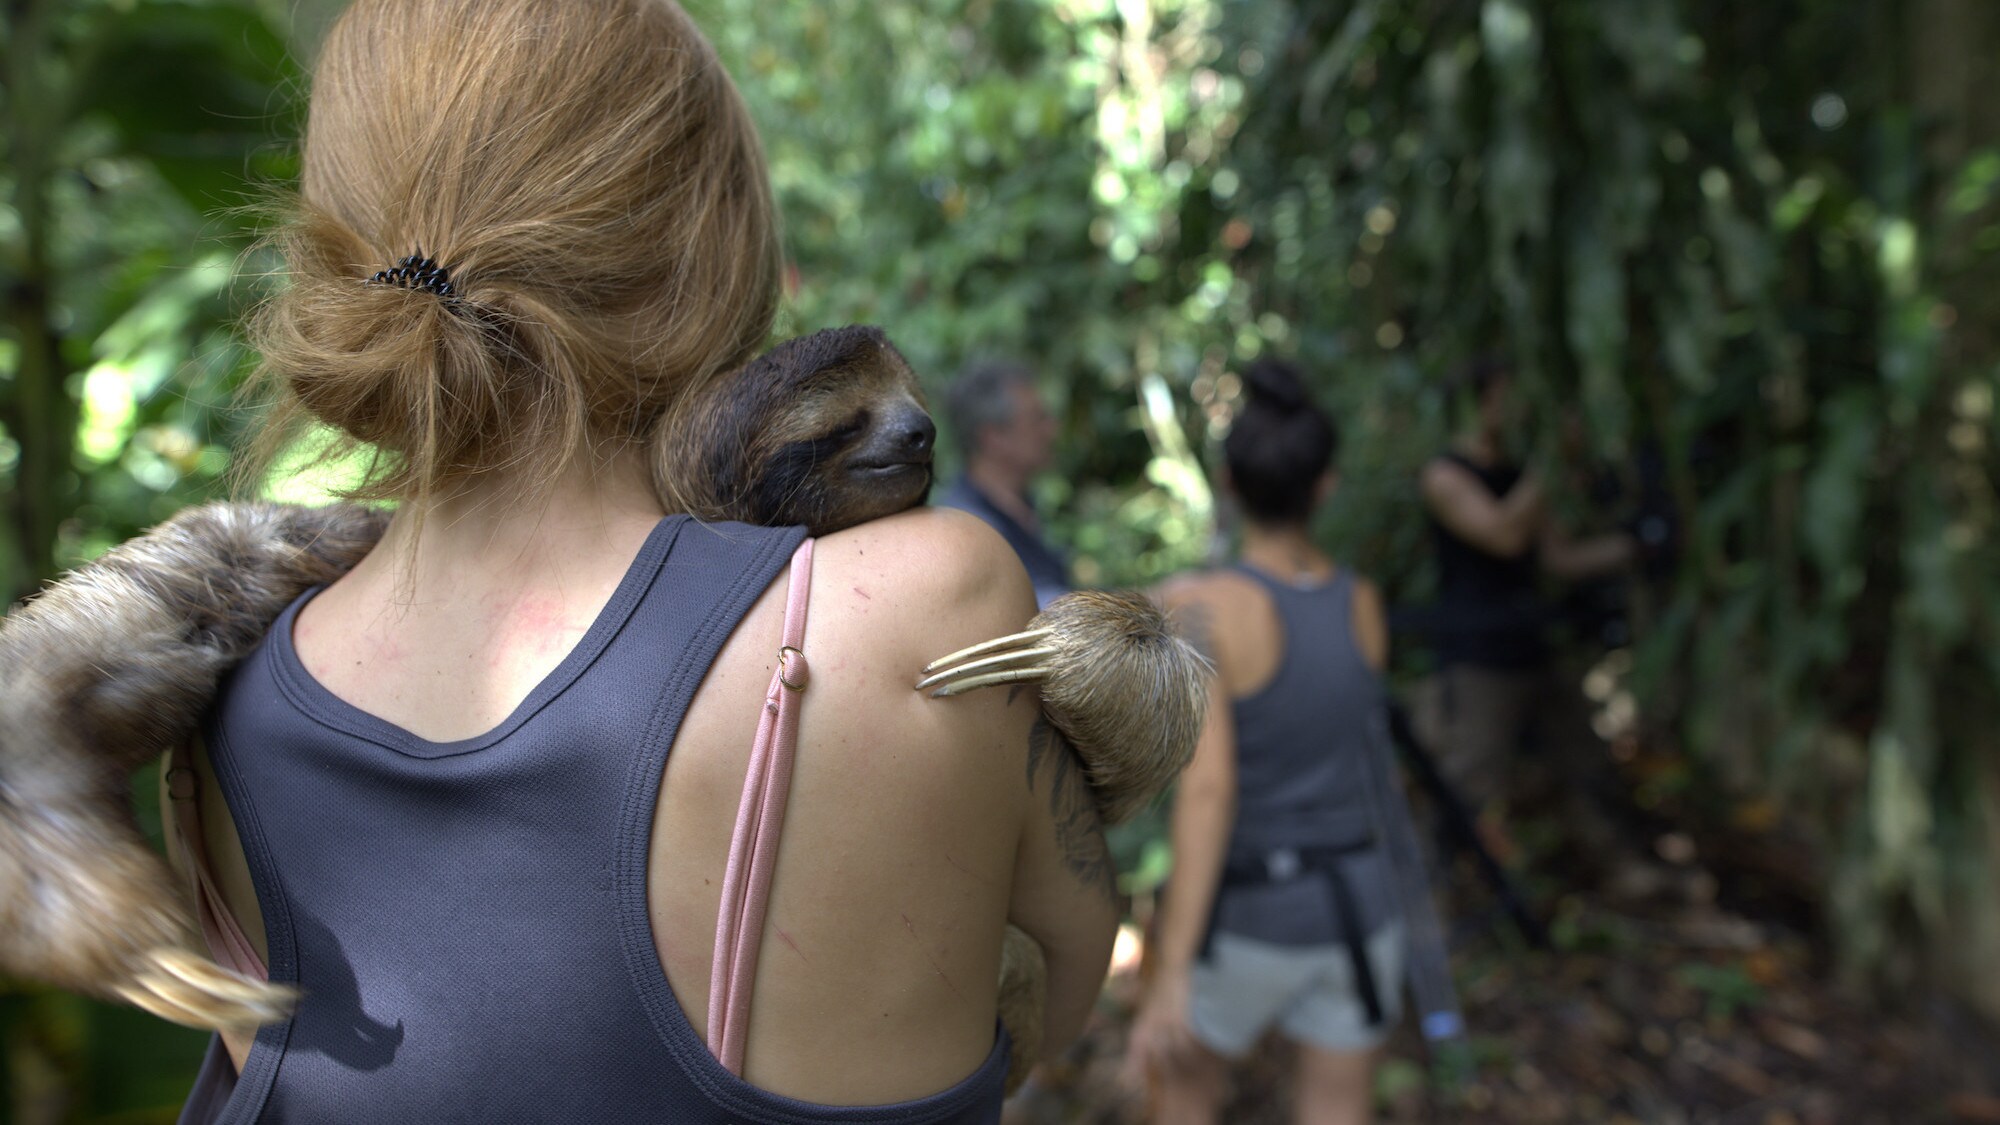 Sloth scientist and CEO of Sloth Conservation Foundation Dr. Becky Cliffe prepares for the release of a rescue sloth in Puerto Viejo, Costa Rica during the "Welcome to the Jungle" episode of “A Real Bug’s Life.” (National Geographic/Alex Jones)